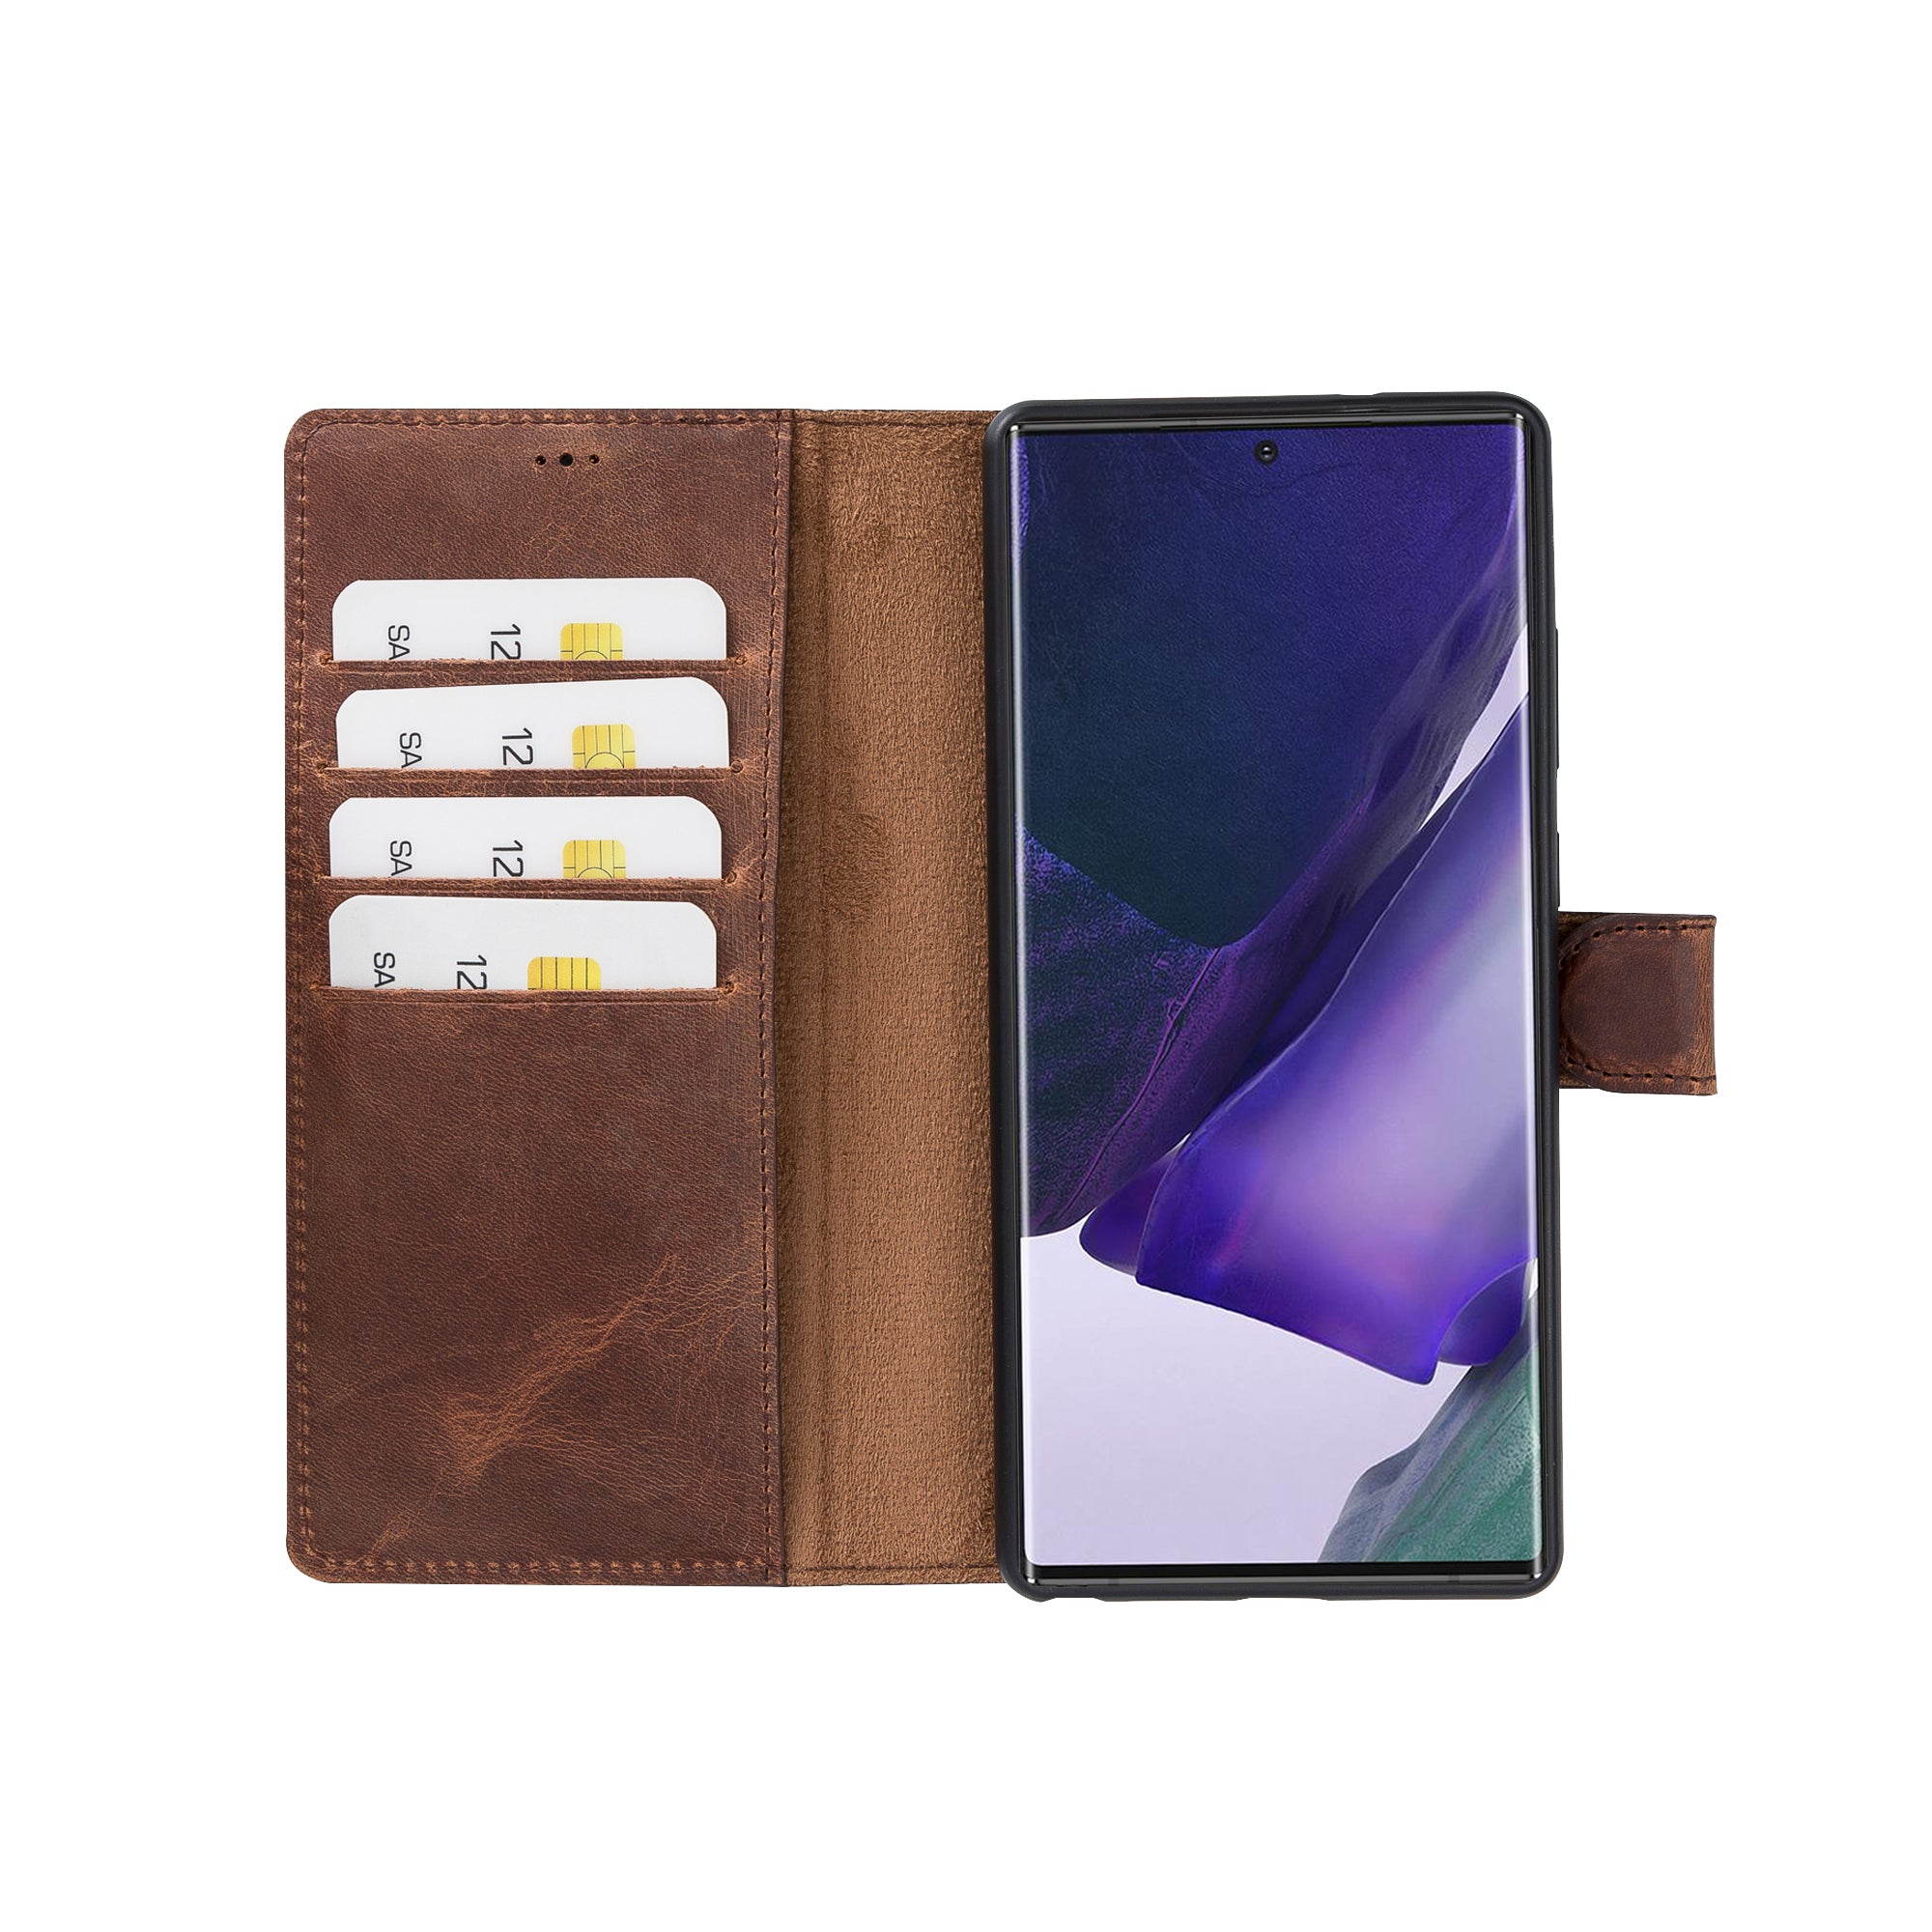 Galaxy Note 20 Ultra Case, Samsung Note 20 Wallet, Best Phone Case for Note  20 Ultra 5G / Note 20 5G, Full Grain Leather Wallet / BROWN 